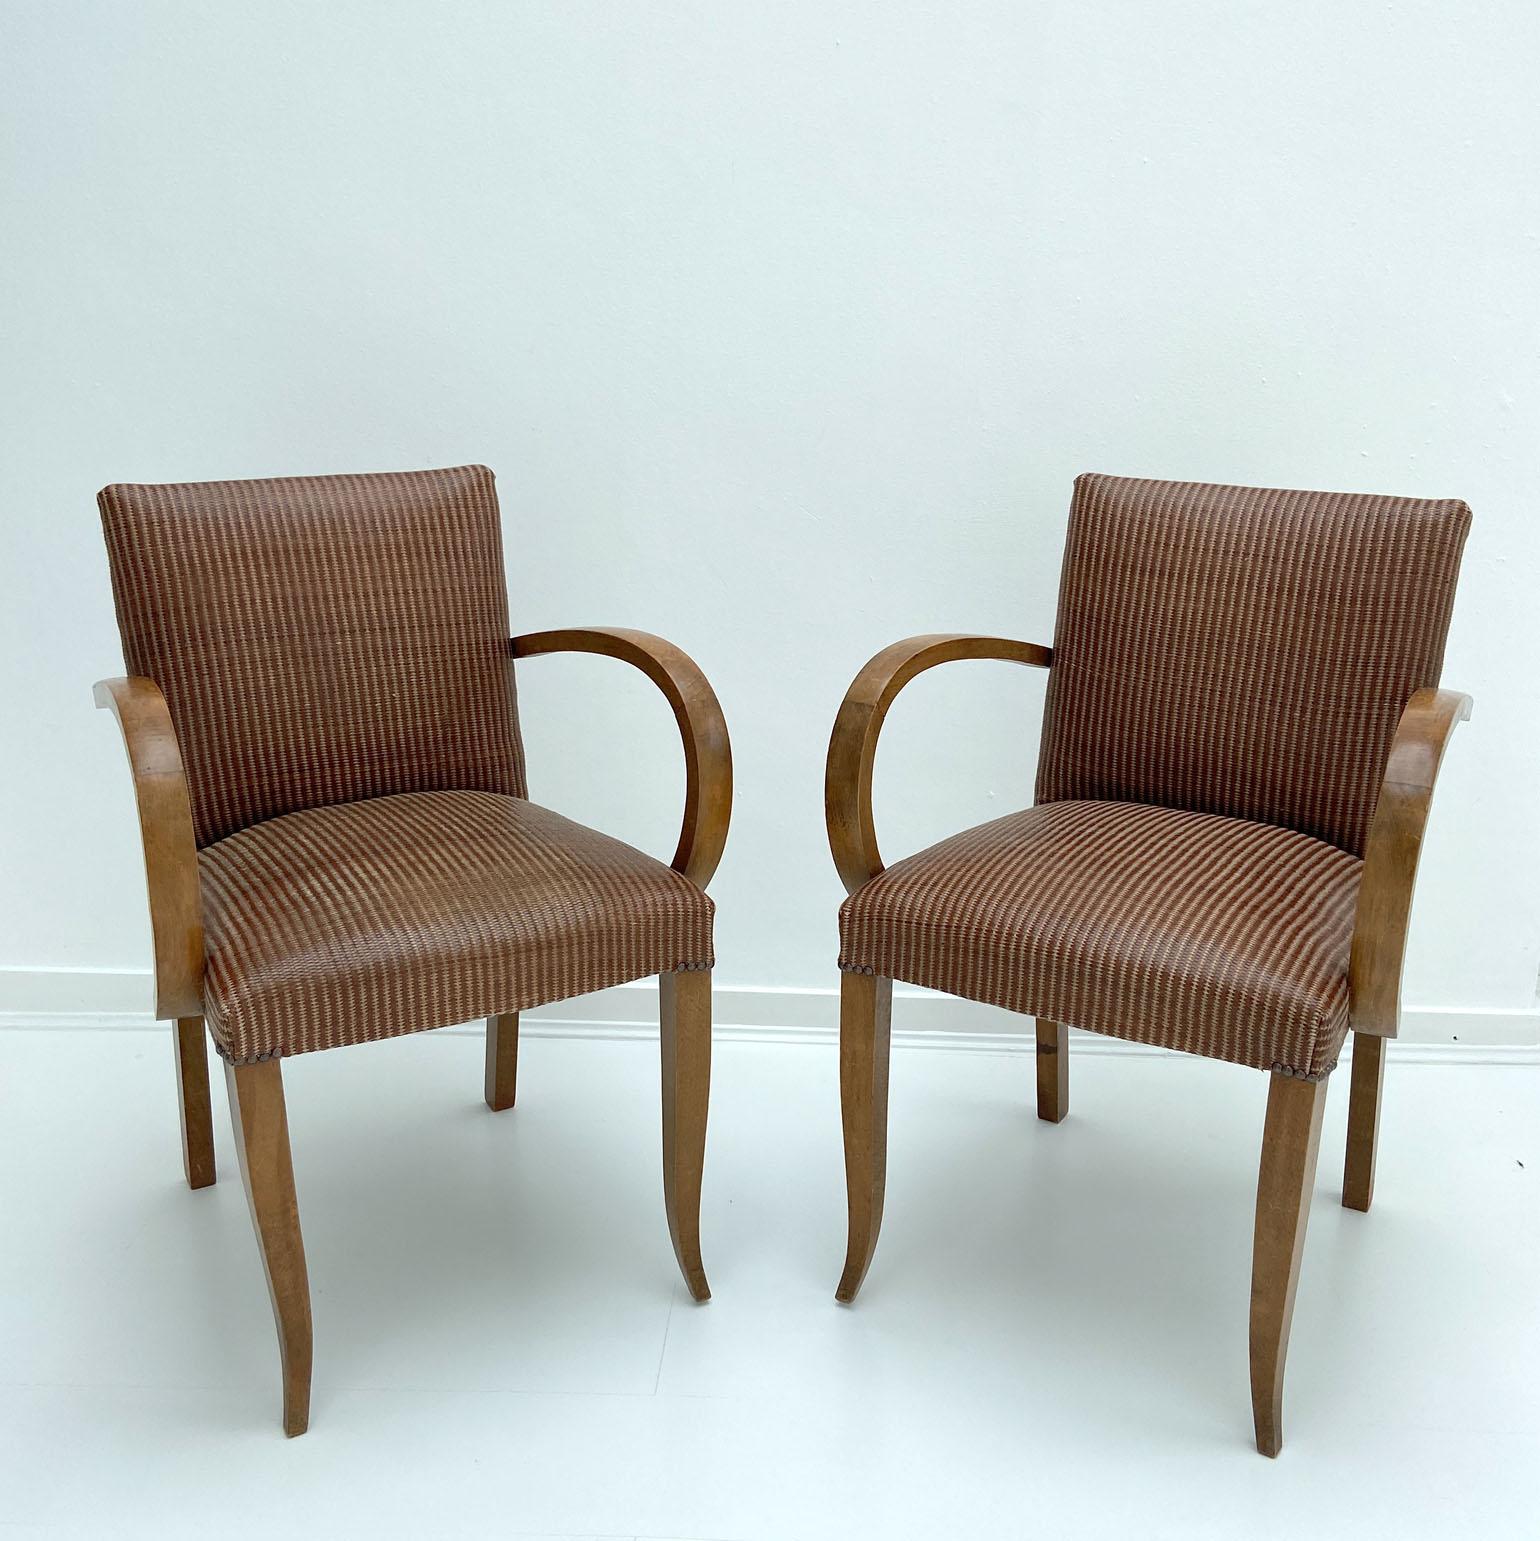 Pair of Art Deco 1930s French armchairs or bridge chairs. The modernist chairs have clean lines and elegant curved front legs in oak. The arms are in bentwood. They have been reupholstered in early 21st Century tobacco brown leather and linen woven